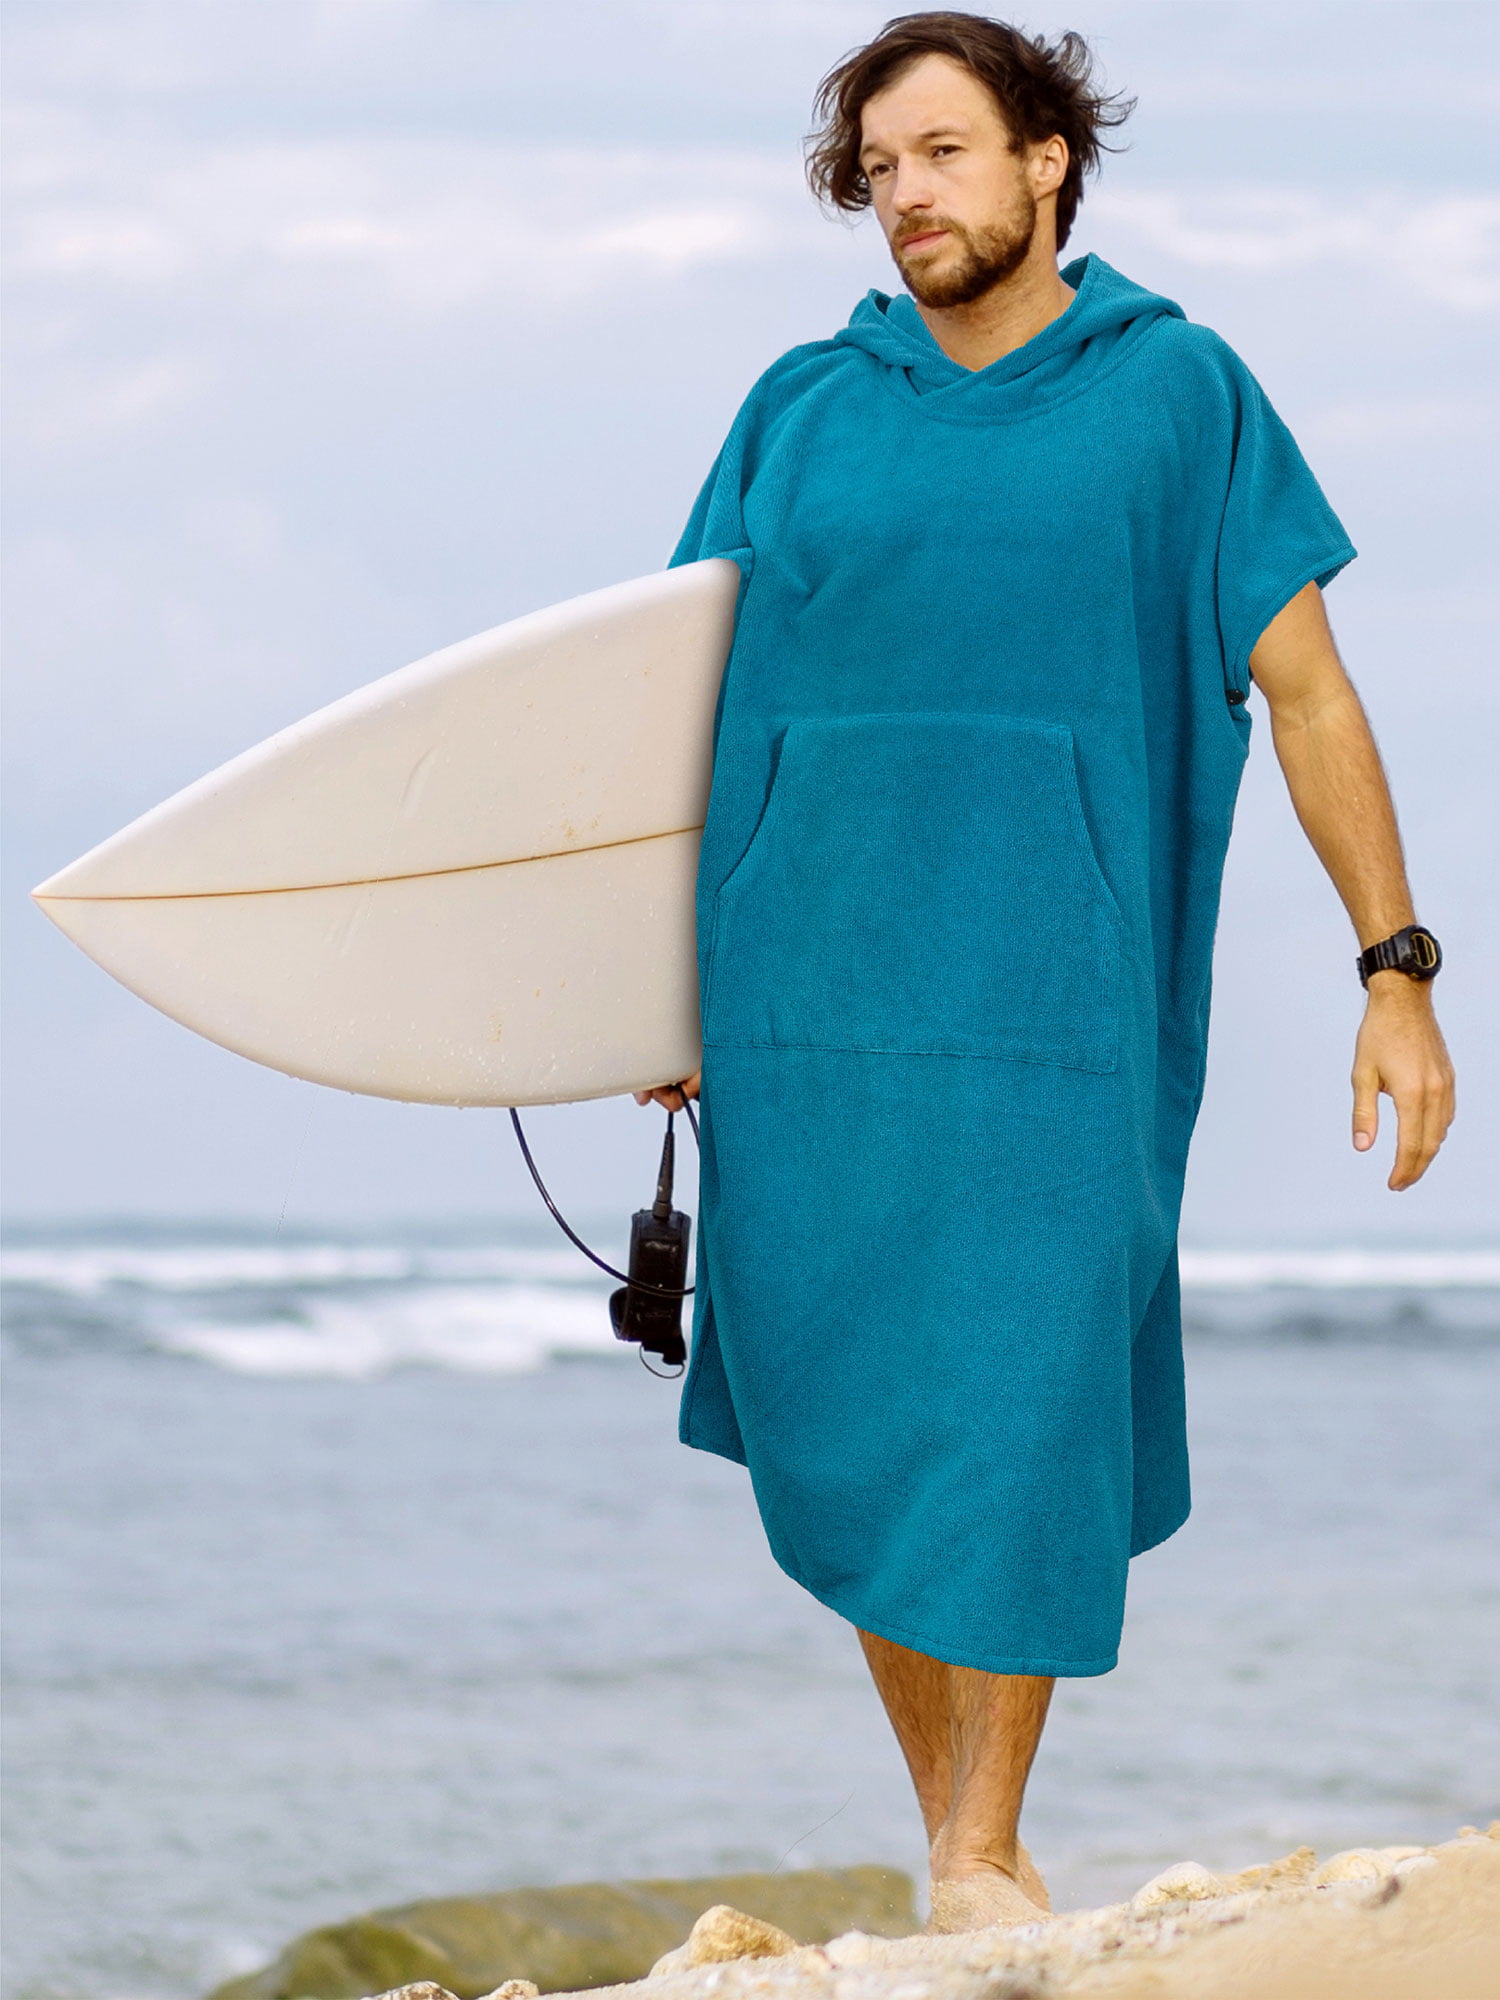 SUN CUBE Surf Poncho Changing Robe with Hood, Thick Quick Dry